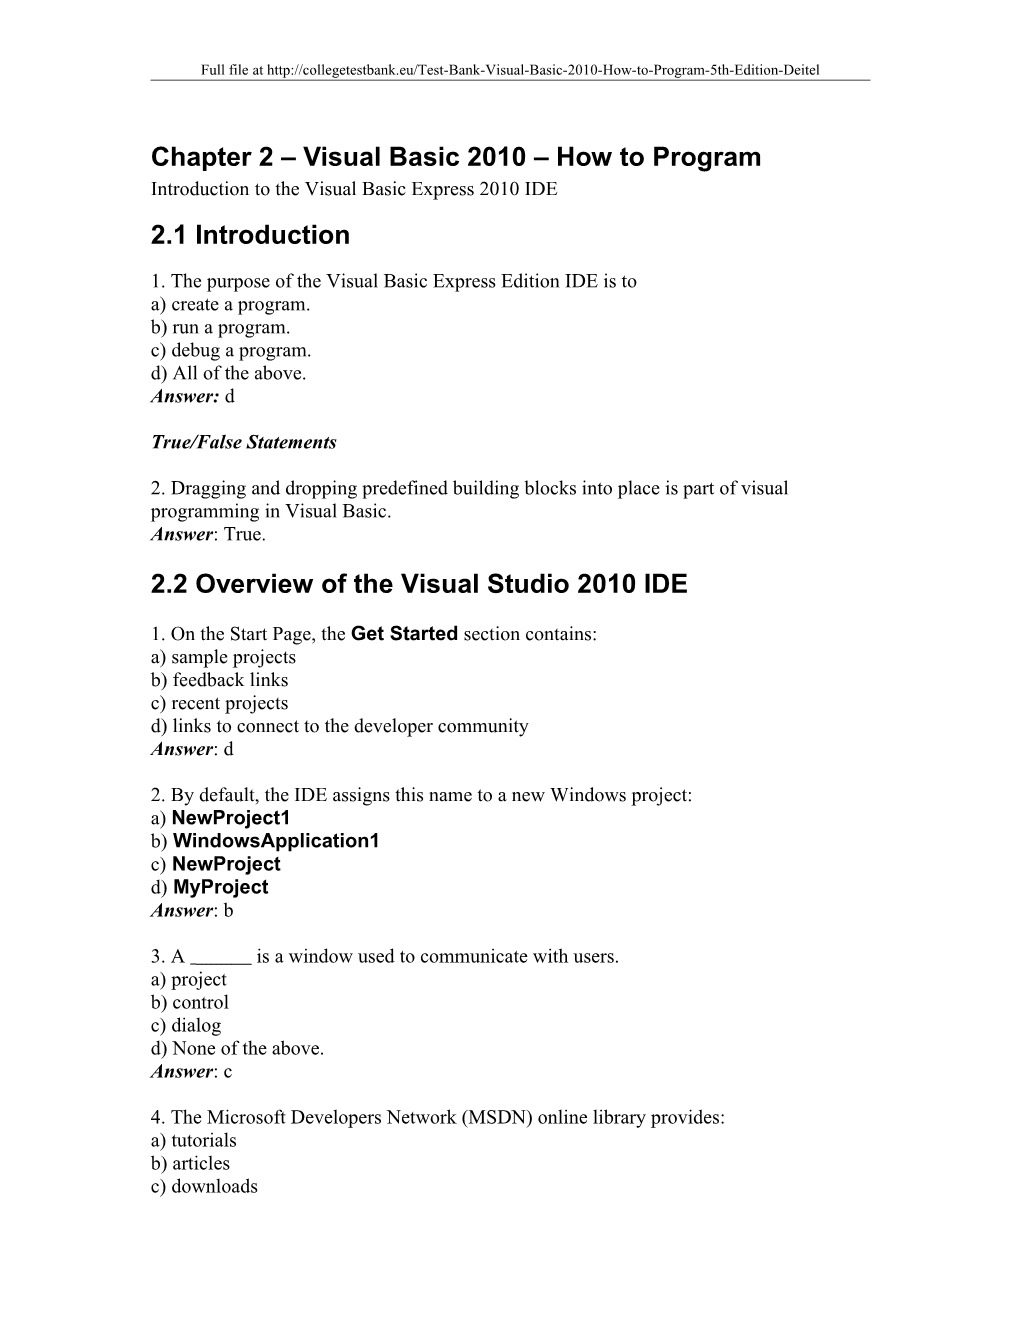 Chapter 2 Visual Basic 2010 How to Program